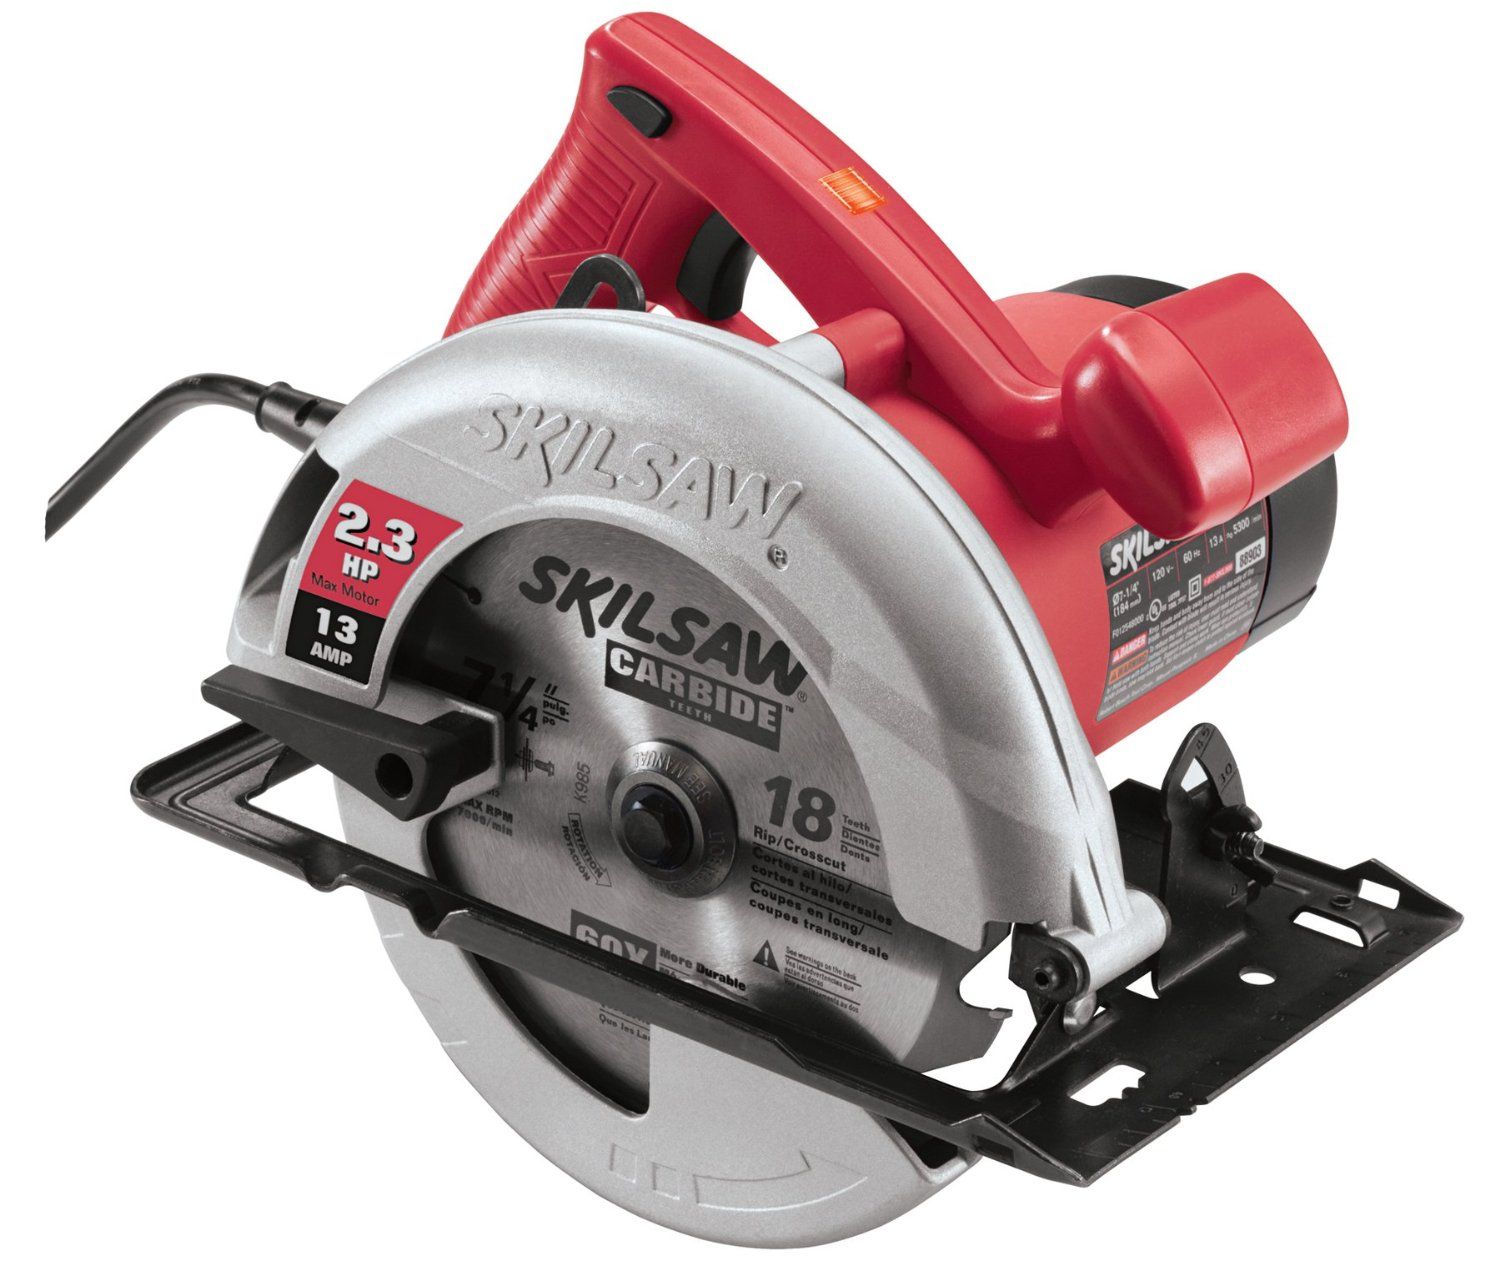 #6 top tool recommendations - circular saw